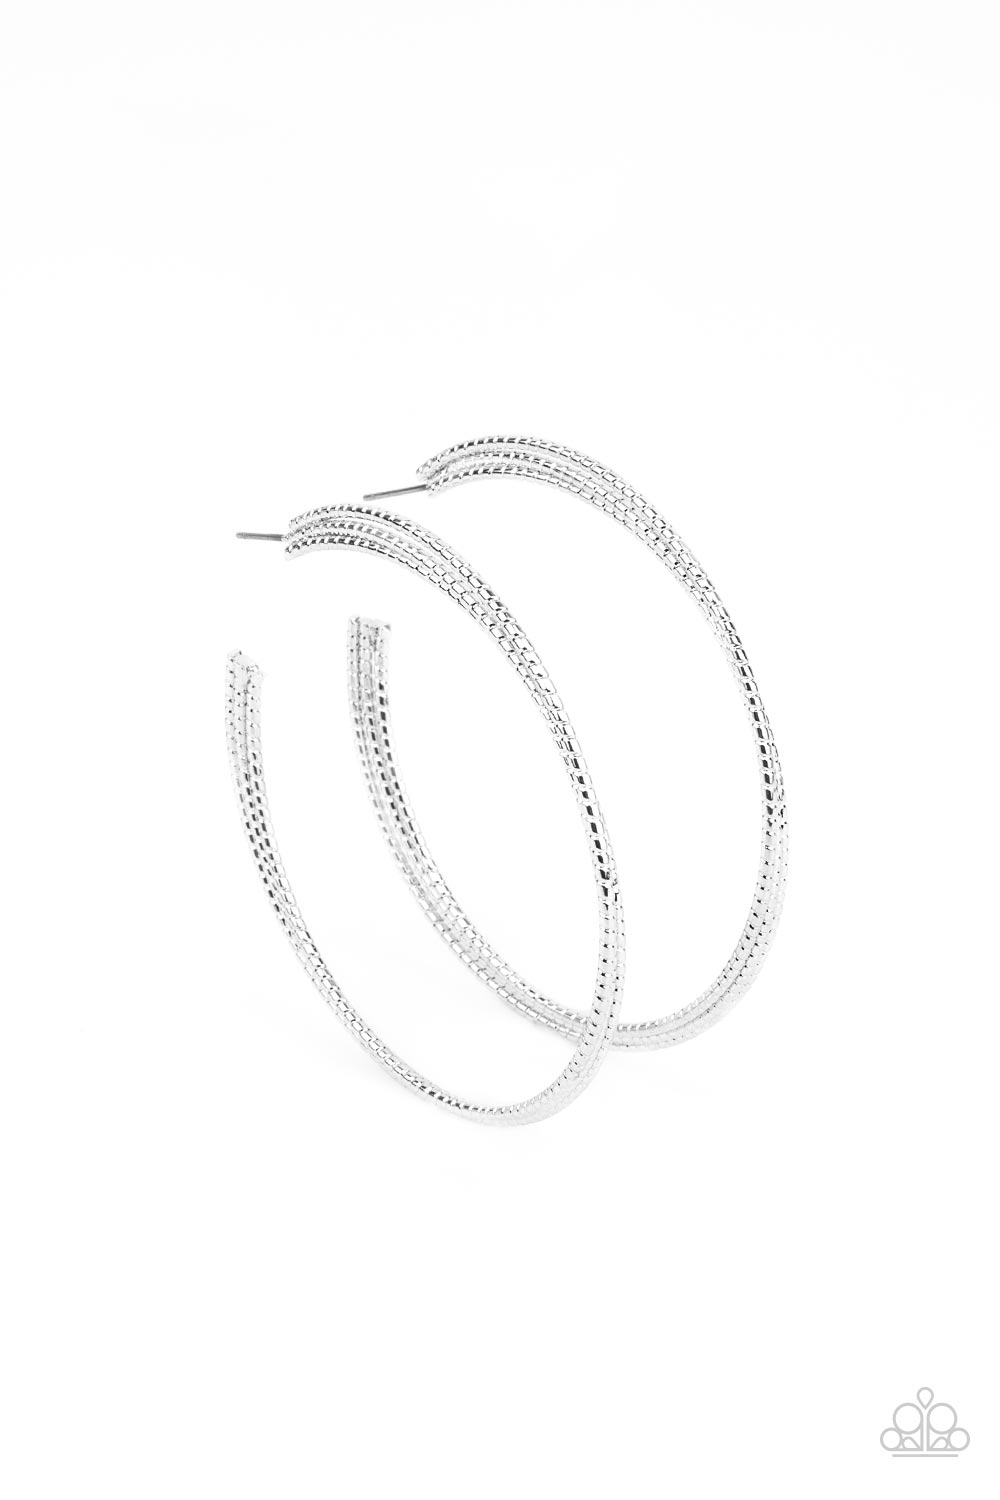 Cut in tactile texture, three silver bars delicately stack and curve into a layered hoop